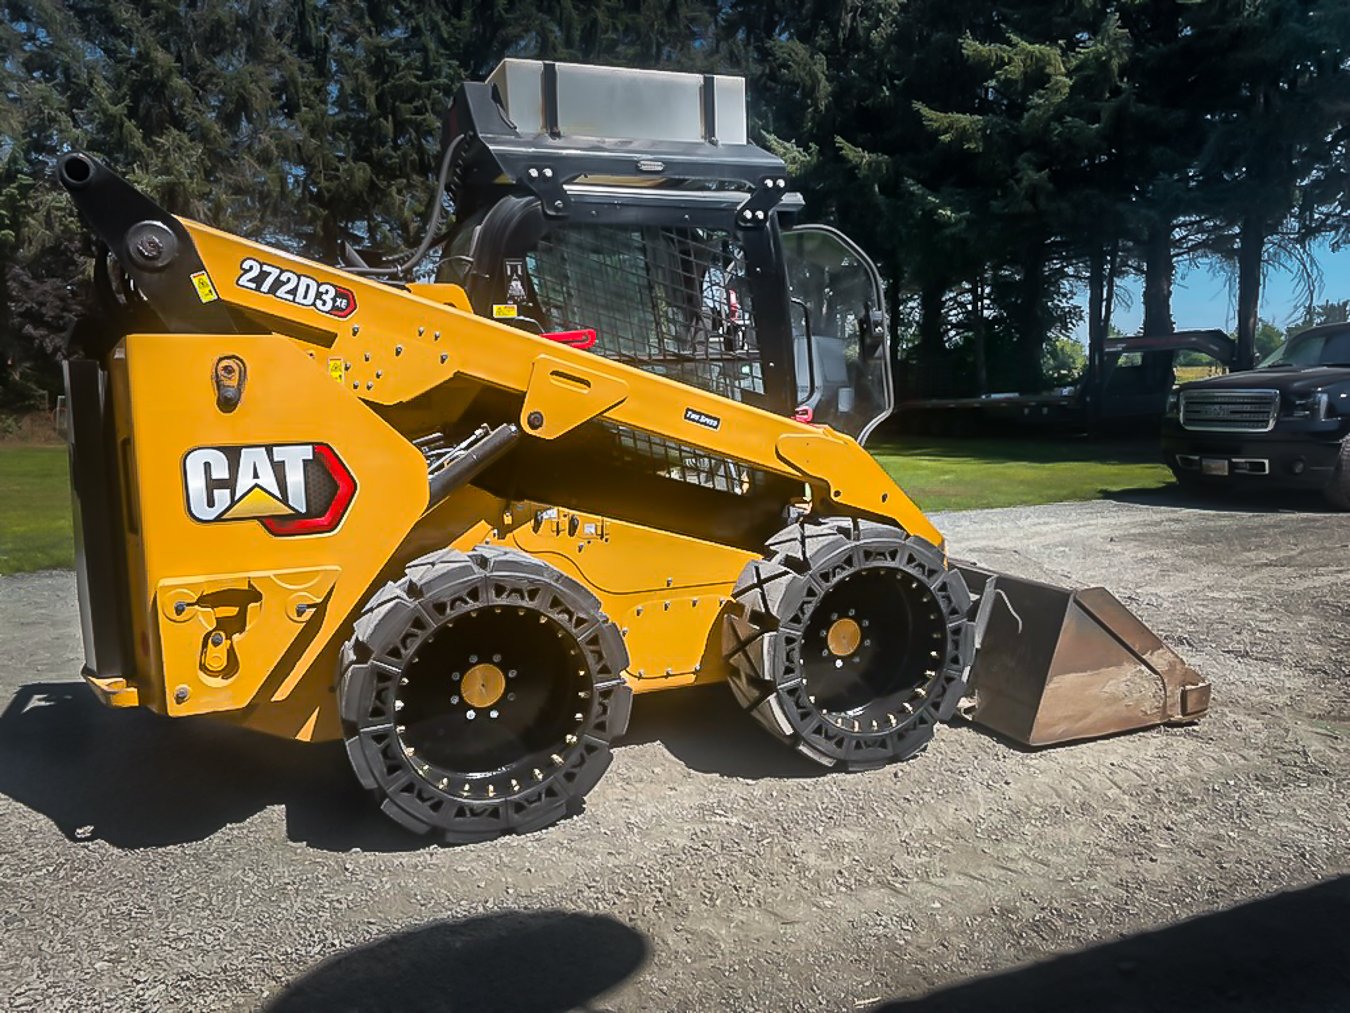 This images shows a CAT 272D3 HS with our EWRS HS solid skid steer tires